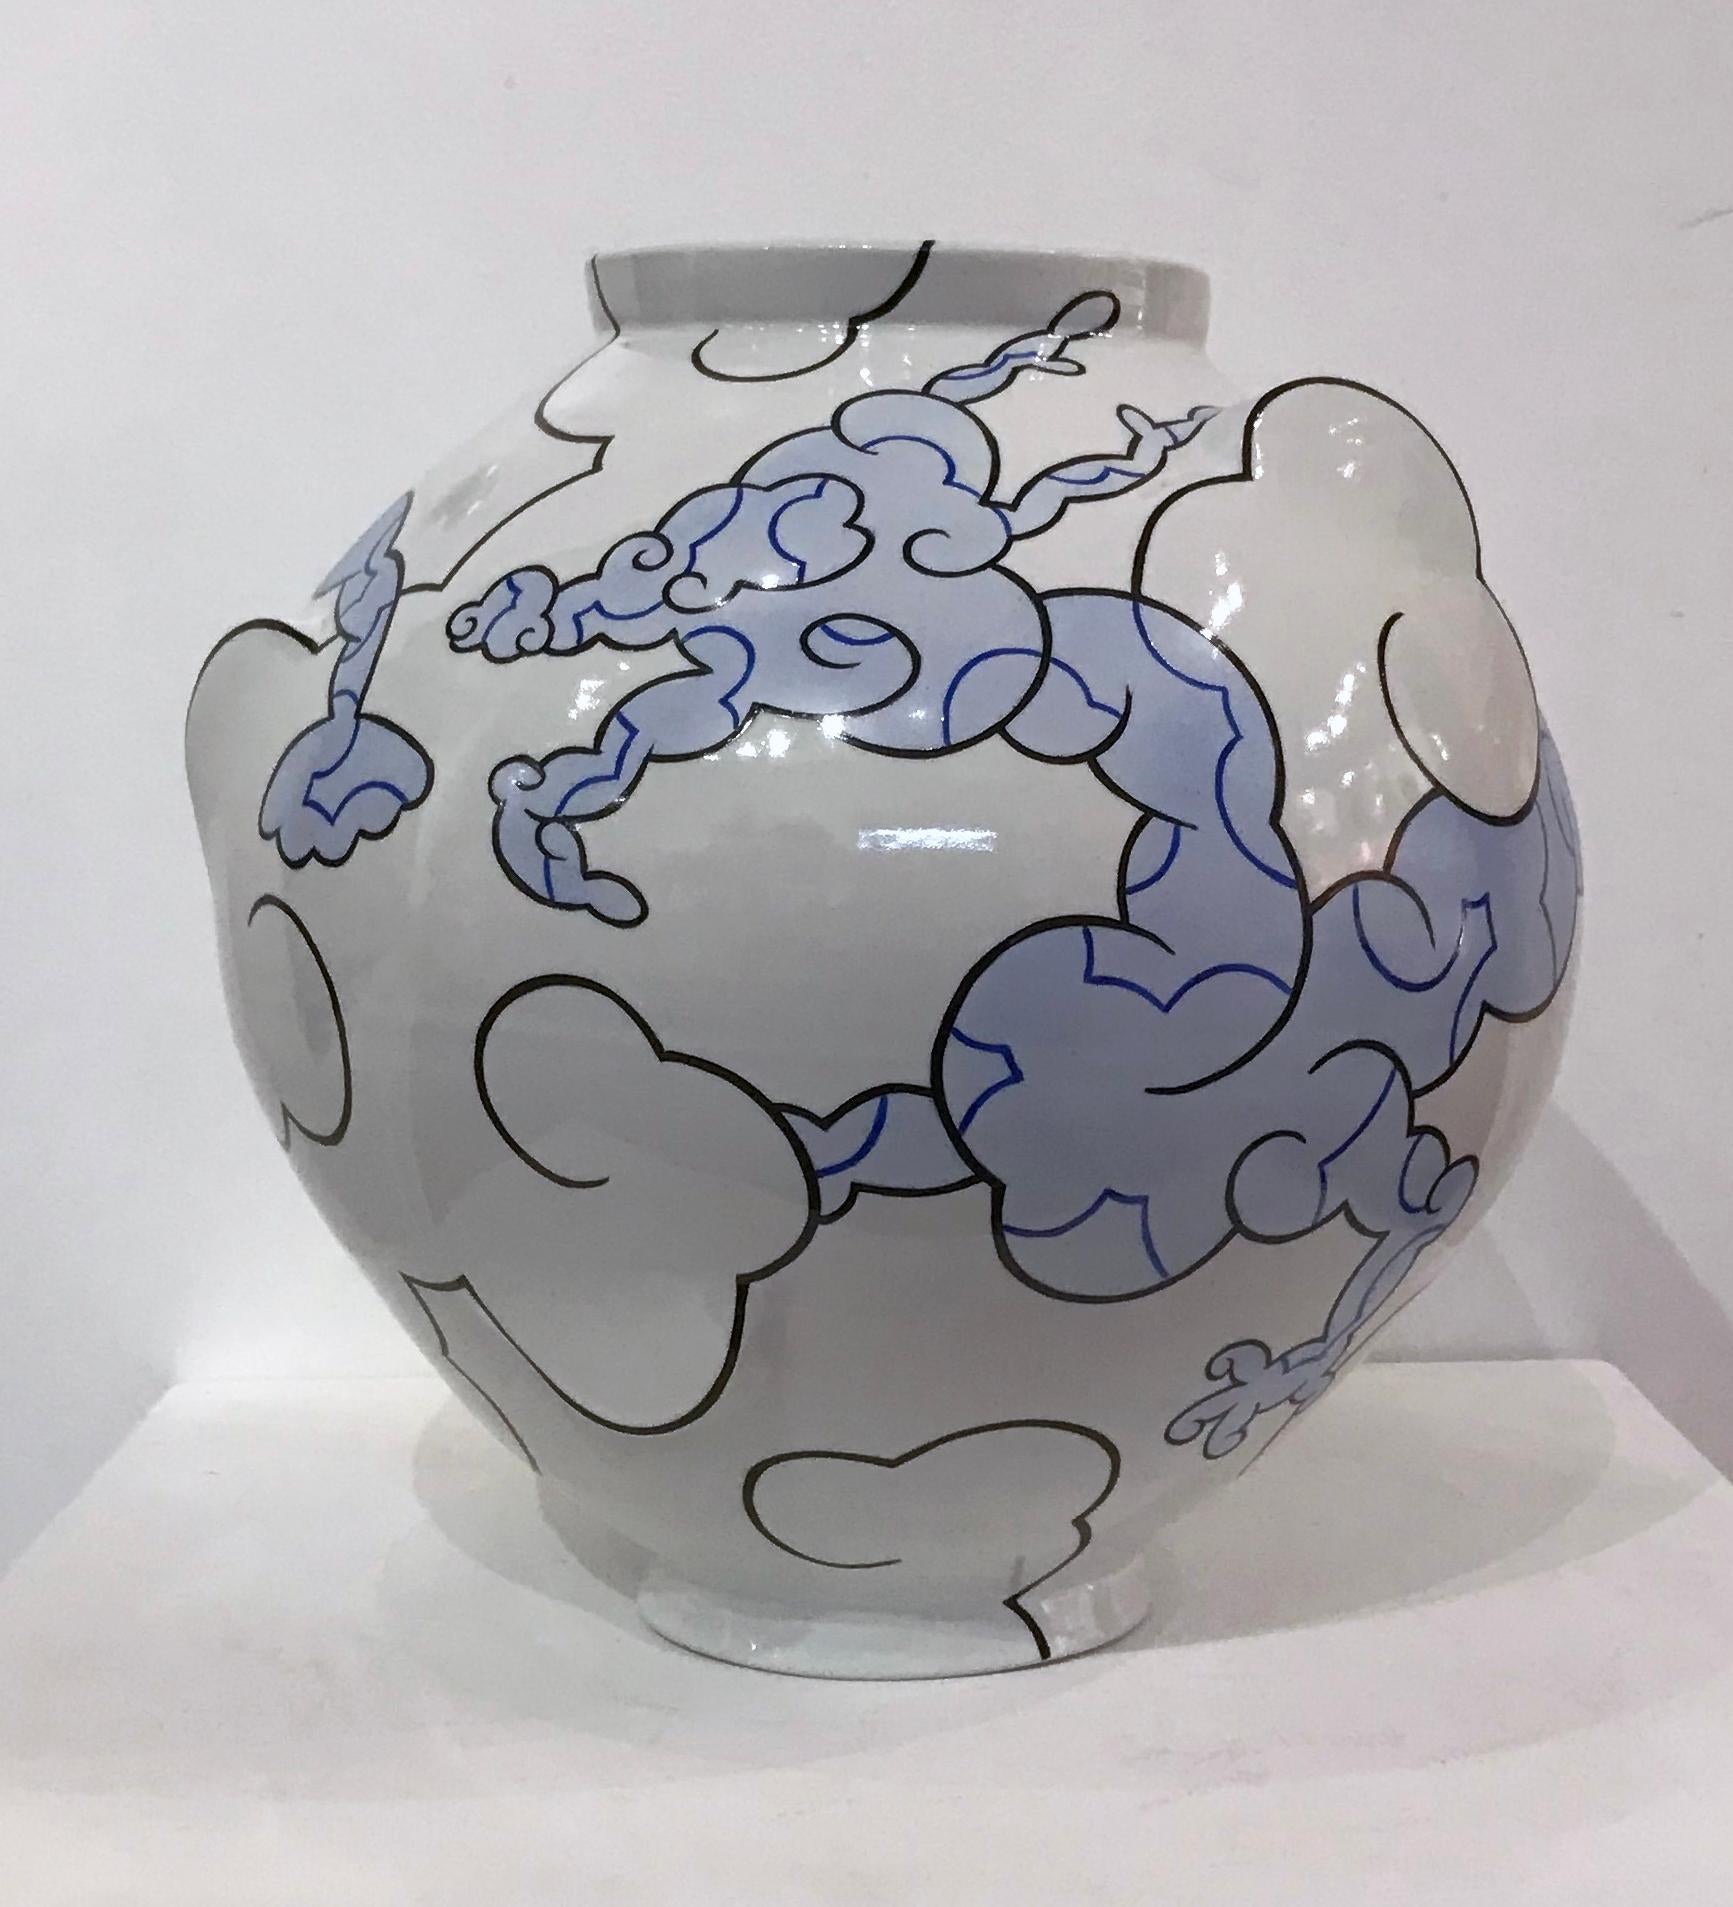 Sam Chung Abstract Sculpture - "Blue Dragon Moon Jar", Porcelain Sculpture with China Paint Illustration